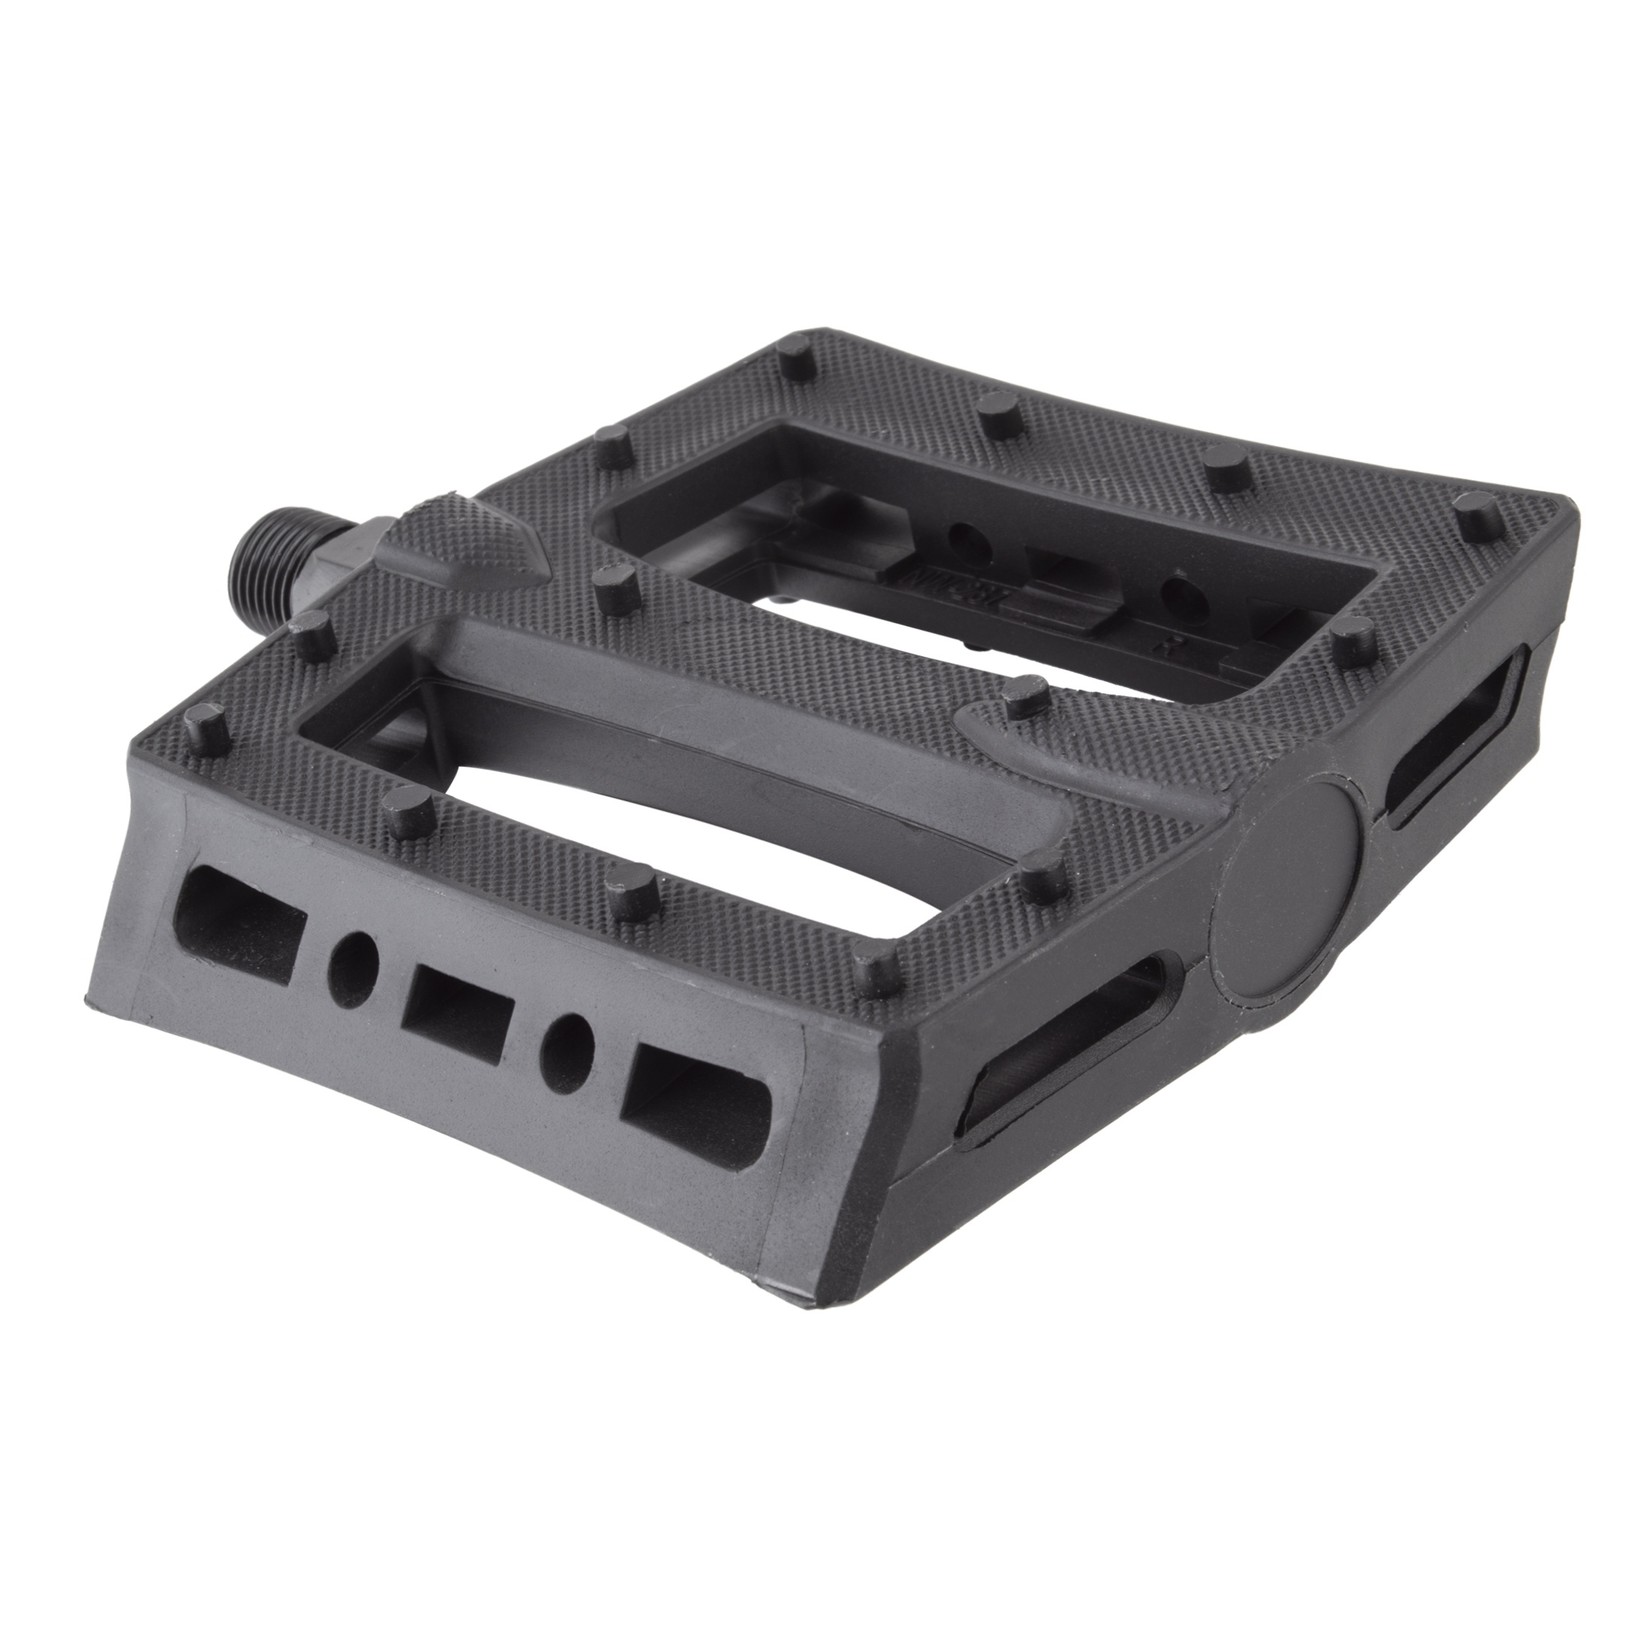 BLACK OPS PEDALS BK-OPS TRACTION 9/16 BK